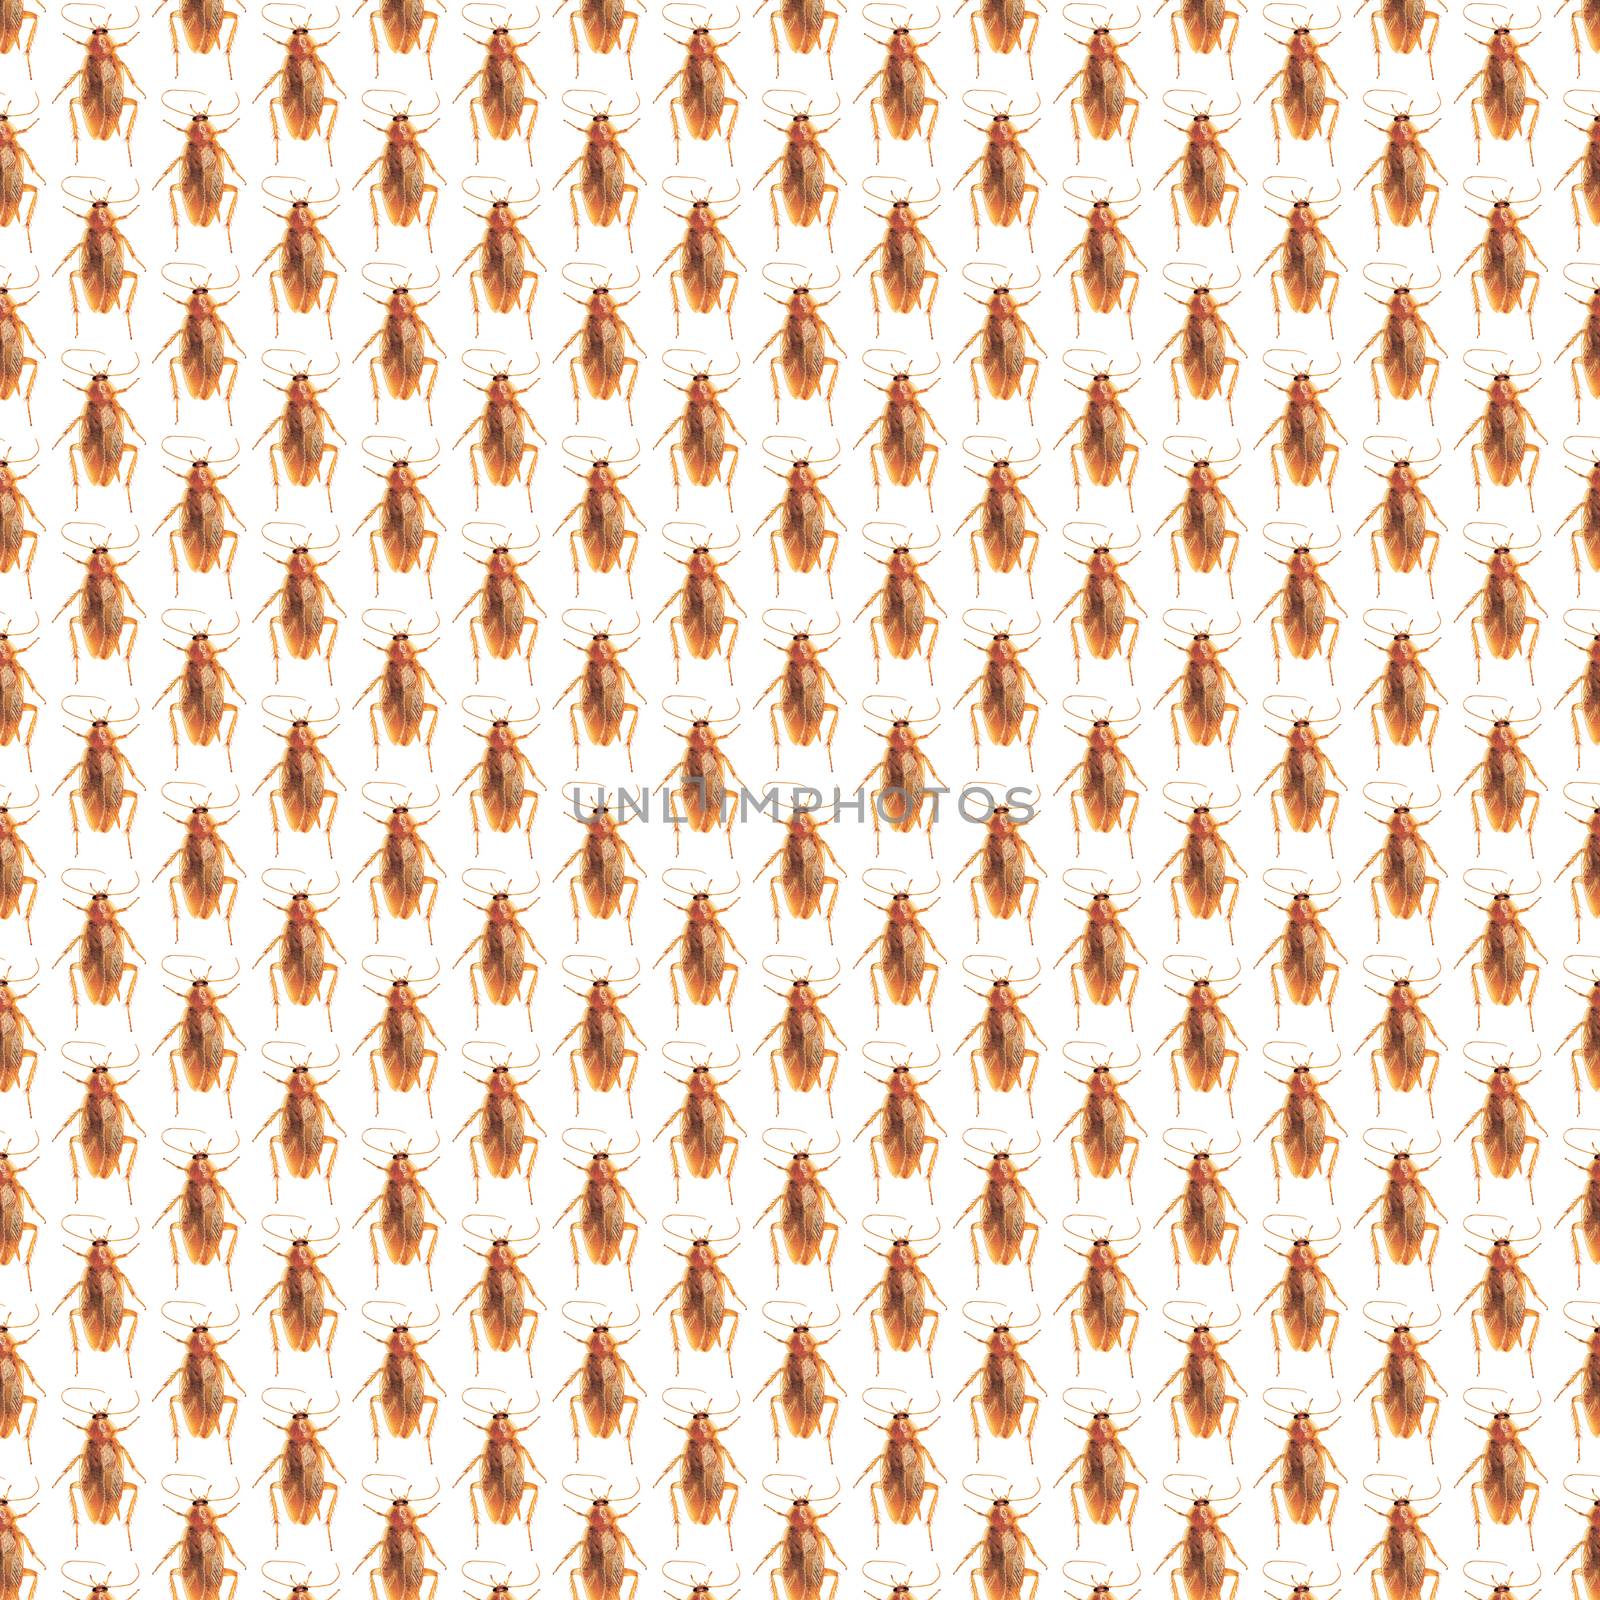 Pattern of Cockroaches on white Background